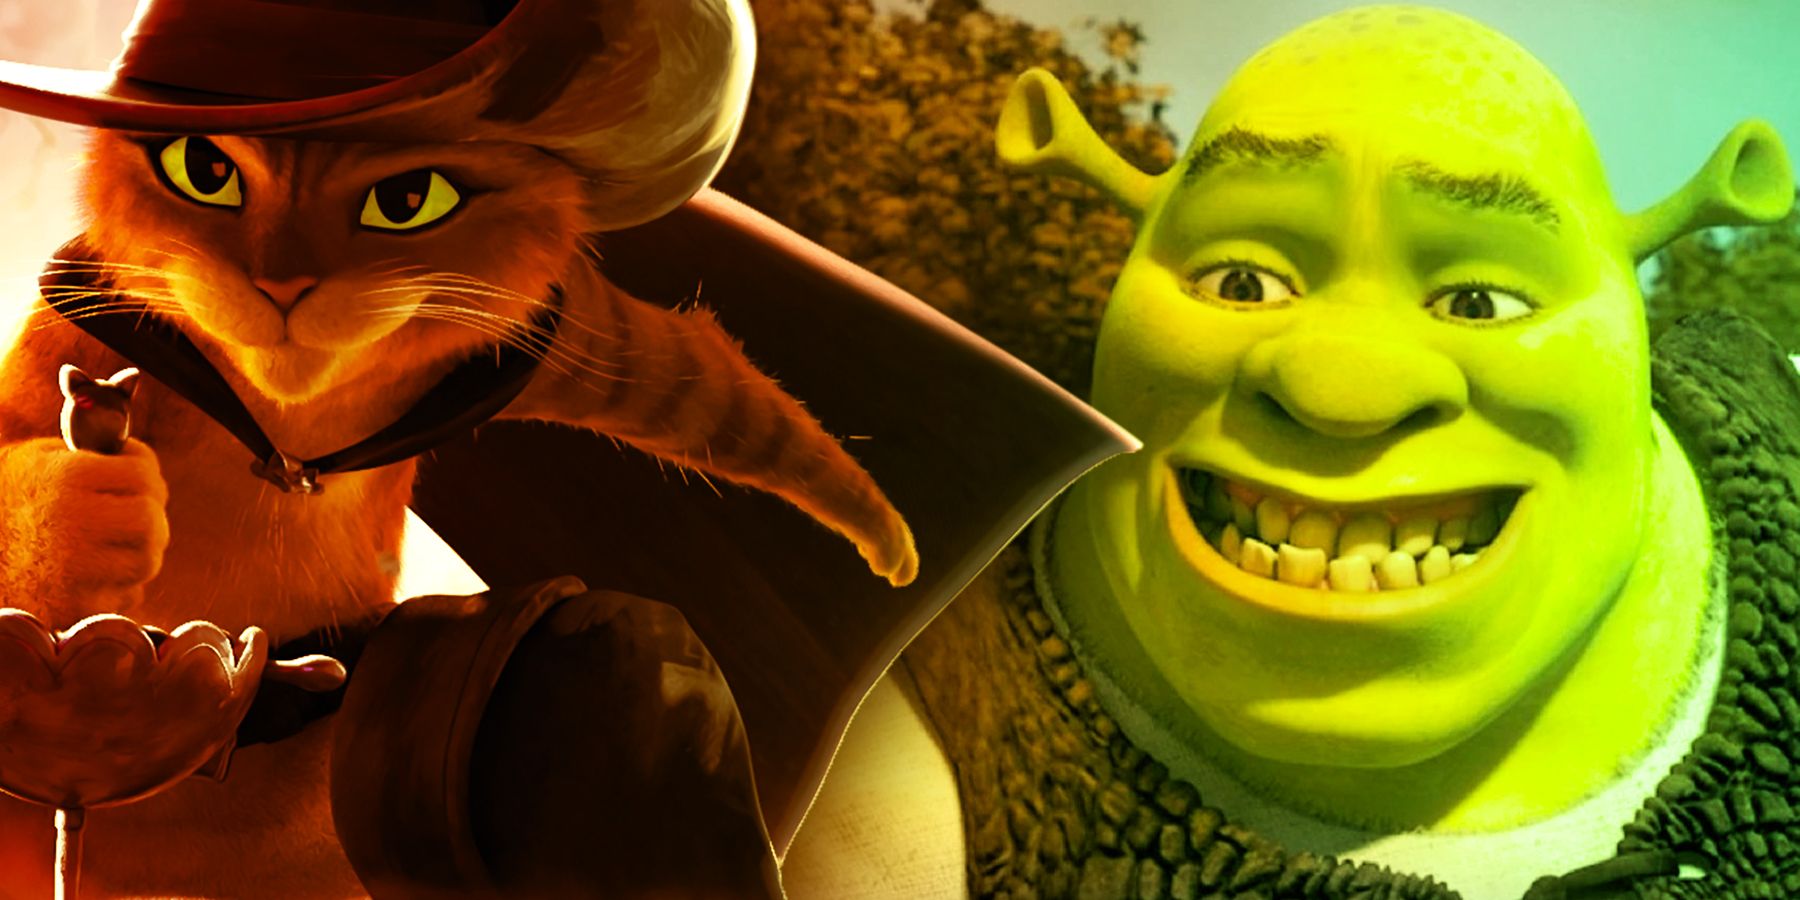 Every Shrek Hero, Ranked From Worst To Best